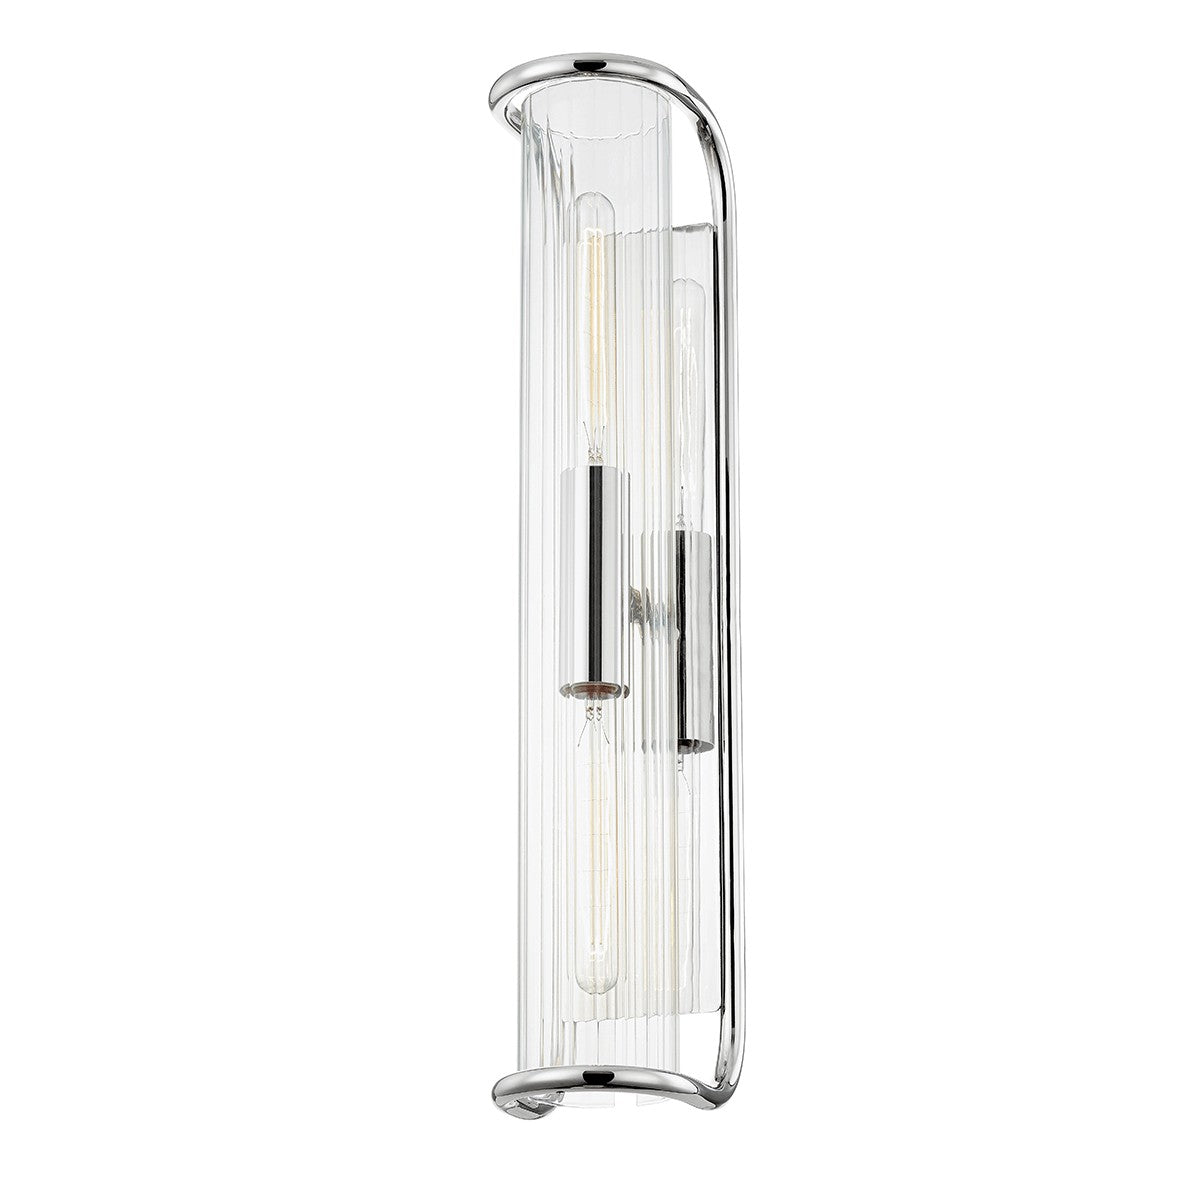 Hudson Valley - 8926-PN - Two Light Wall Sconce - Fillmore - Polished Nickel